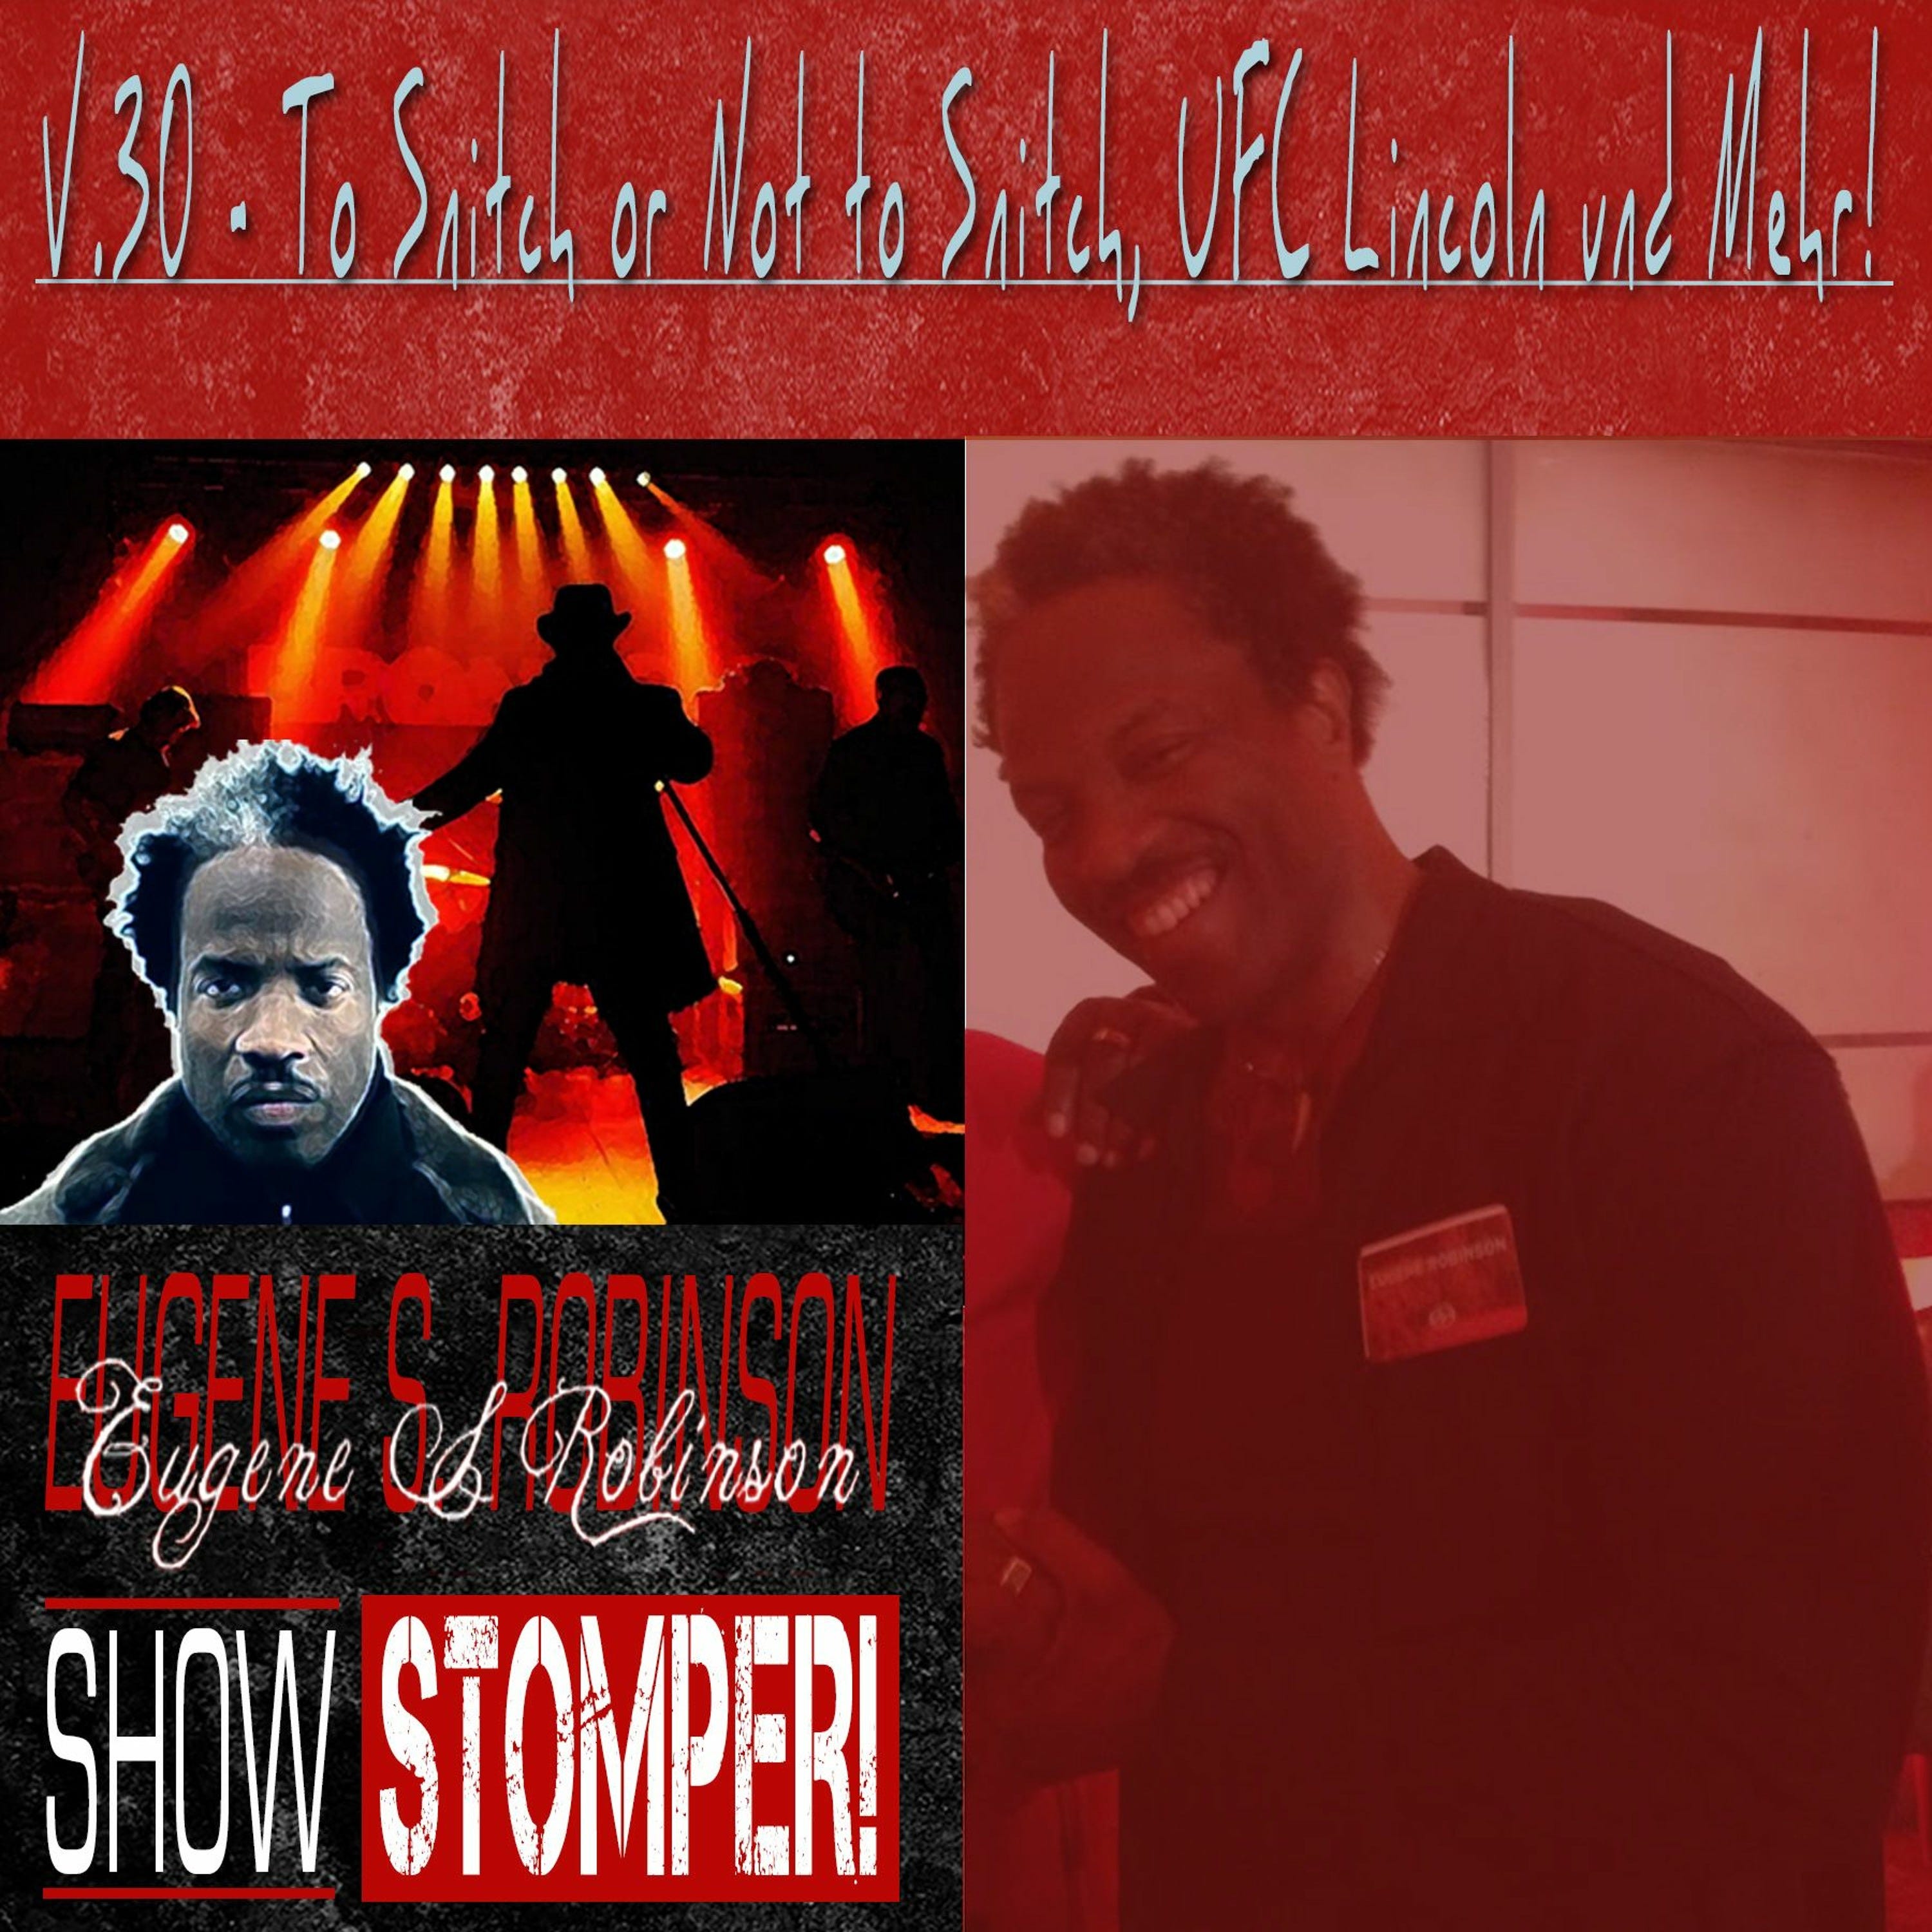 The Eugene S. Robinson Show Stomper! V.30 - To Snitch Or Not To Snitch UFC Lincoln Und Mehr!